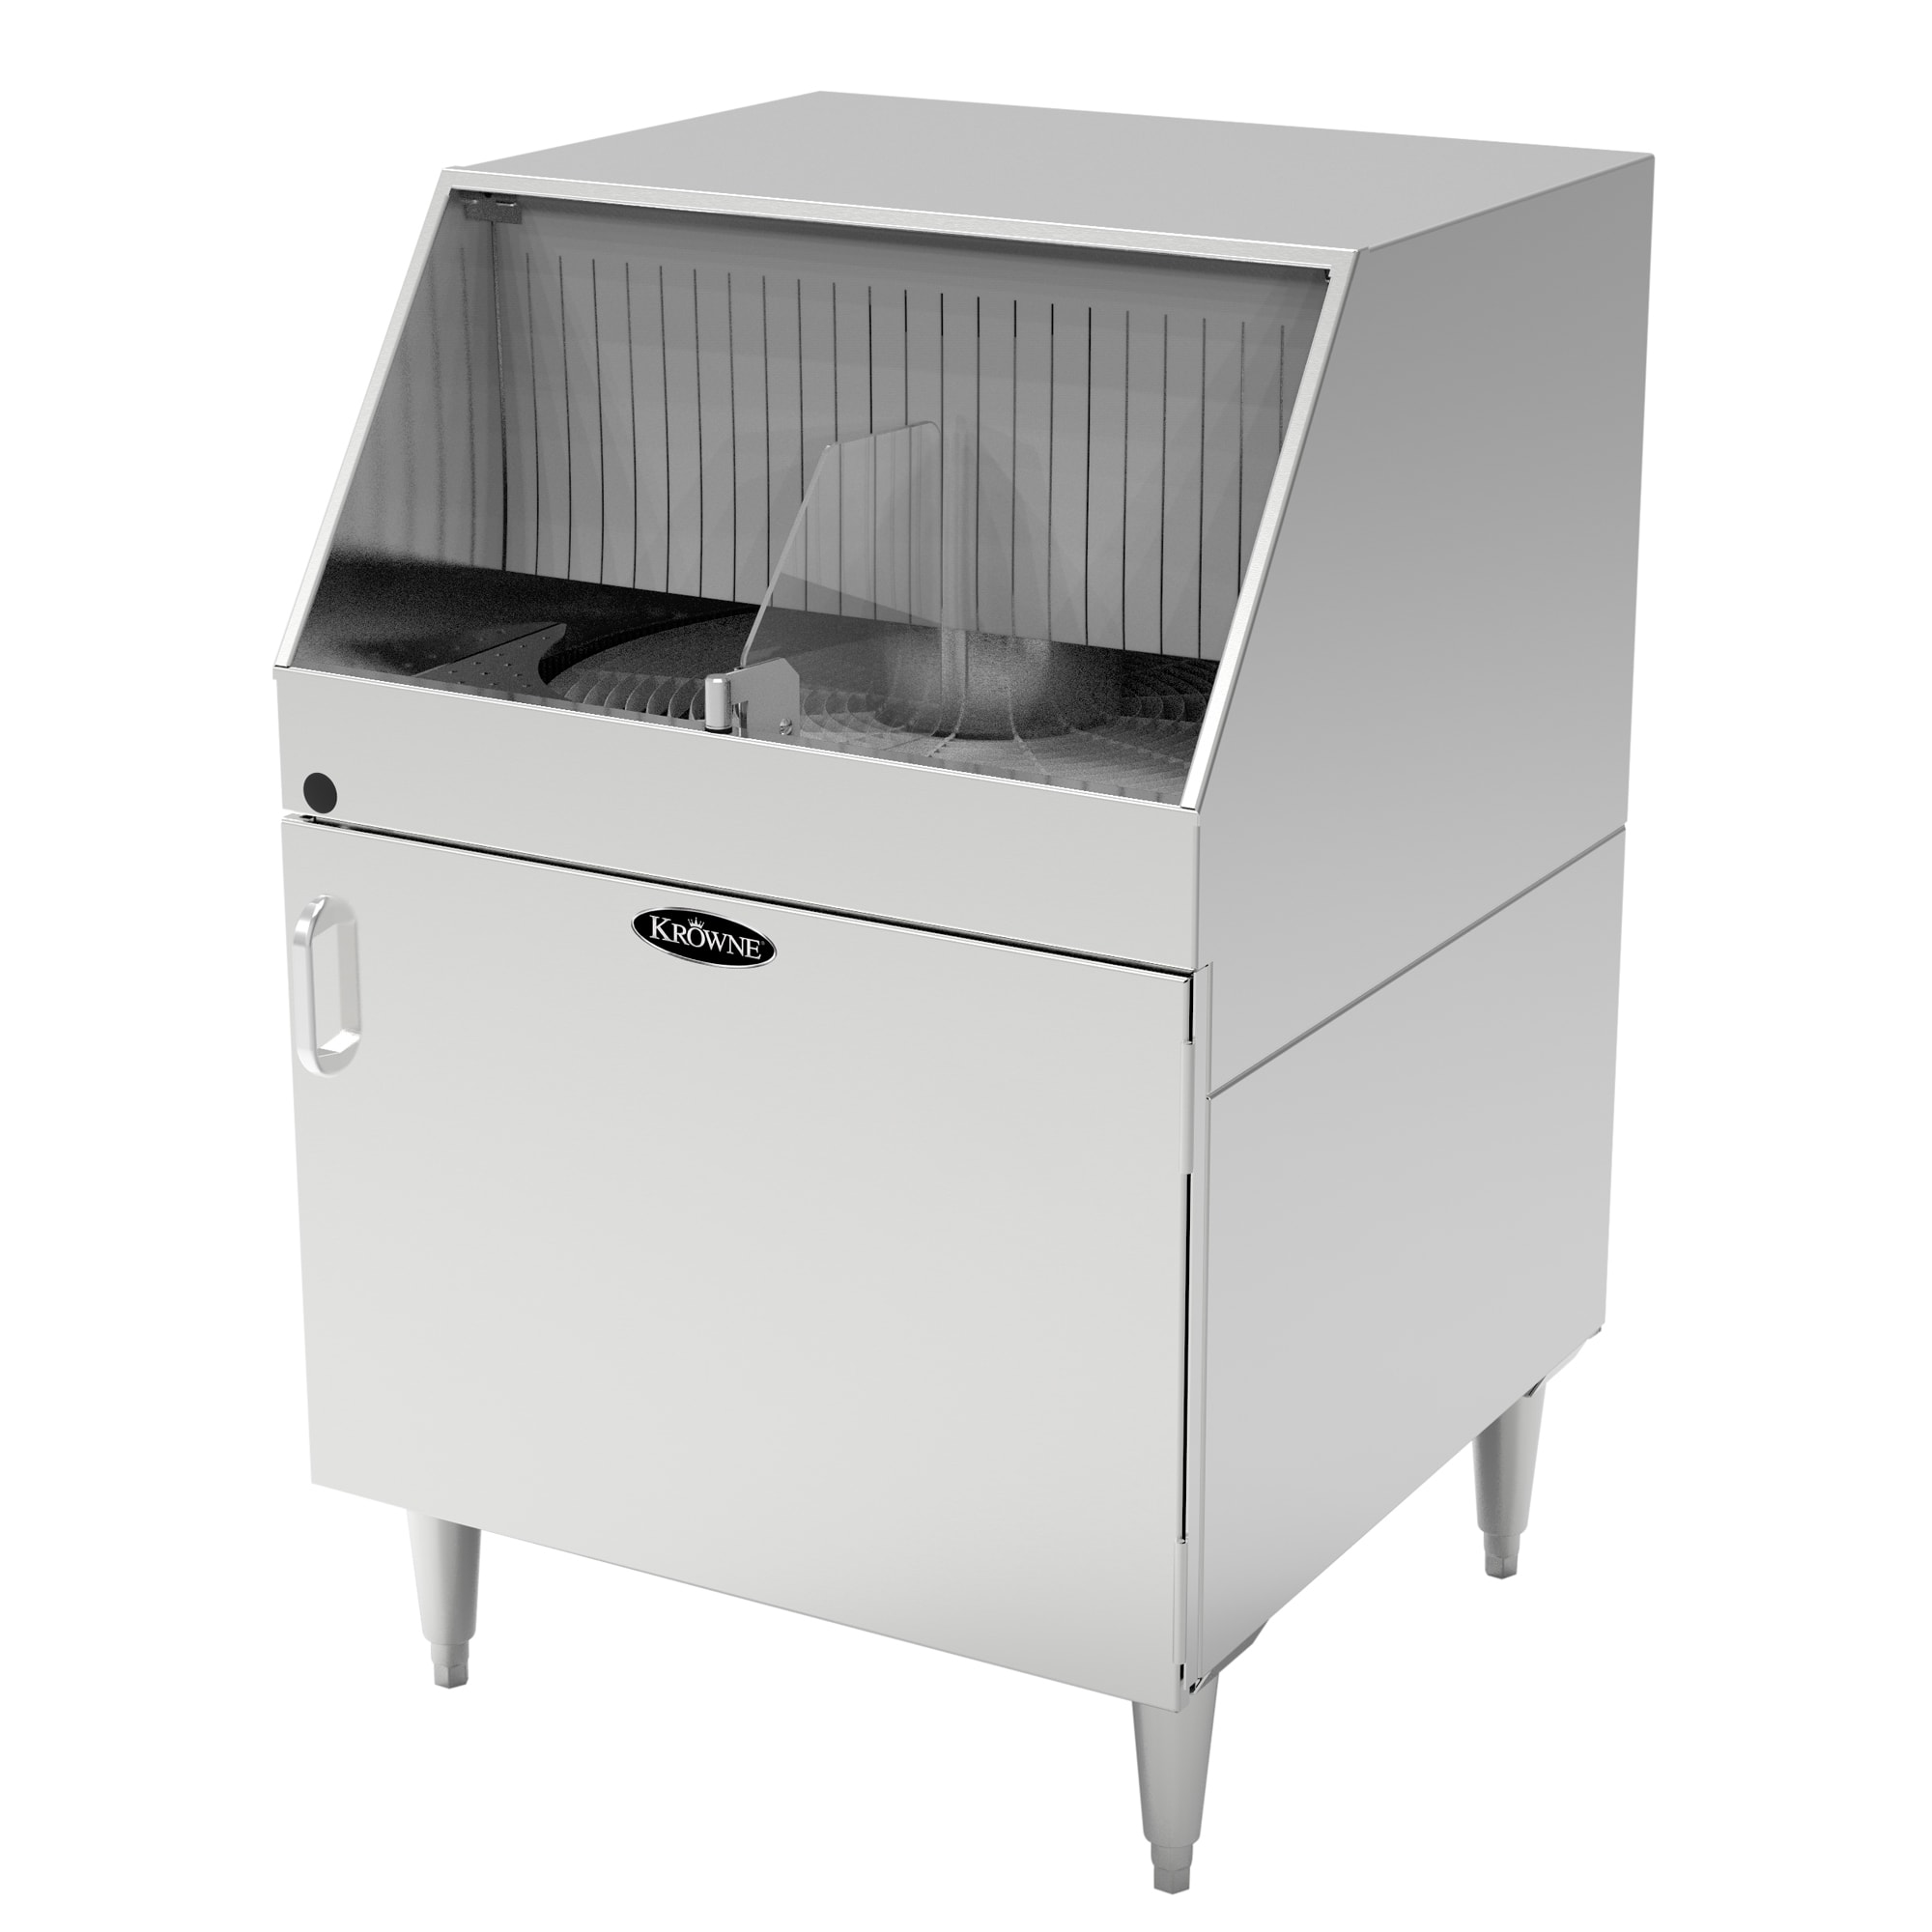 Jackson Delta 115, 1200 Glasses/Hr Underbar Glass Washer, Low Temperature  Chemical Sanitizing